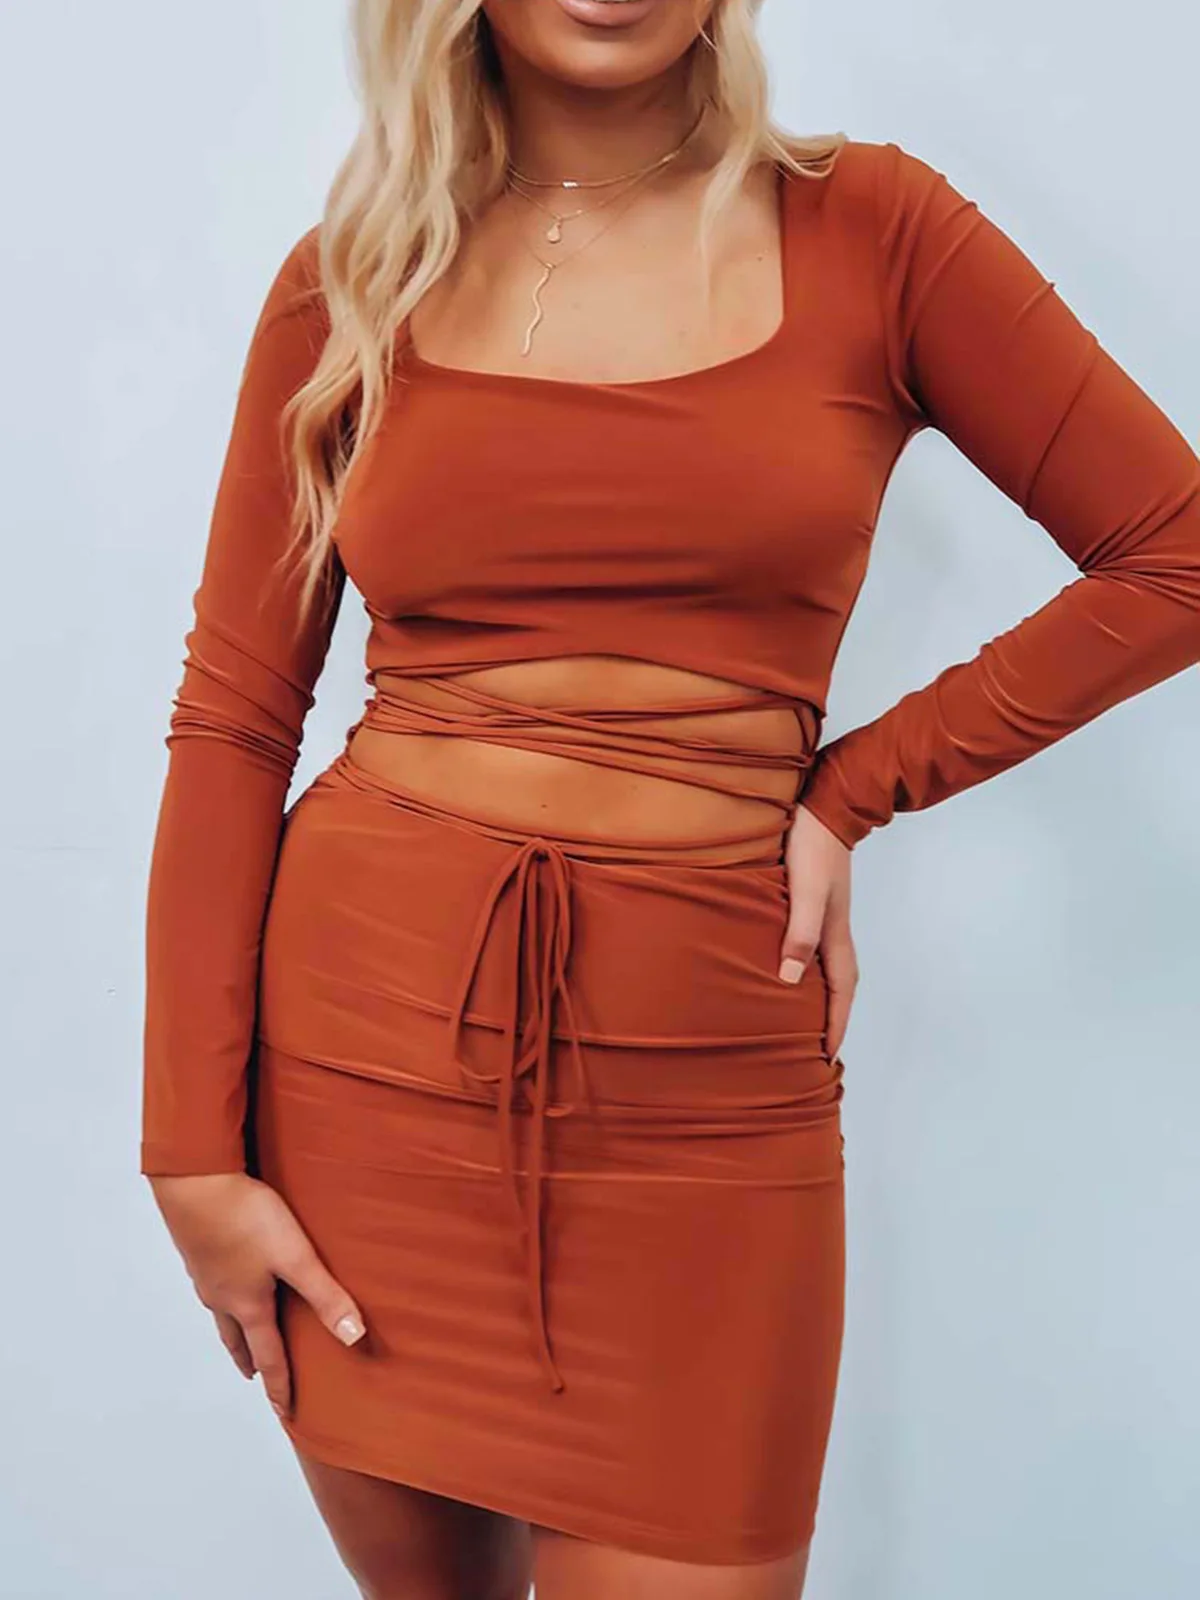 

2023 Autumn Winter Criss-Cross Drawstring Bodycon Dress Orange Bodycon Women Sexy Party Solid Color Charming Y2K Cozy Outfits